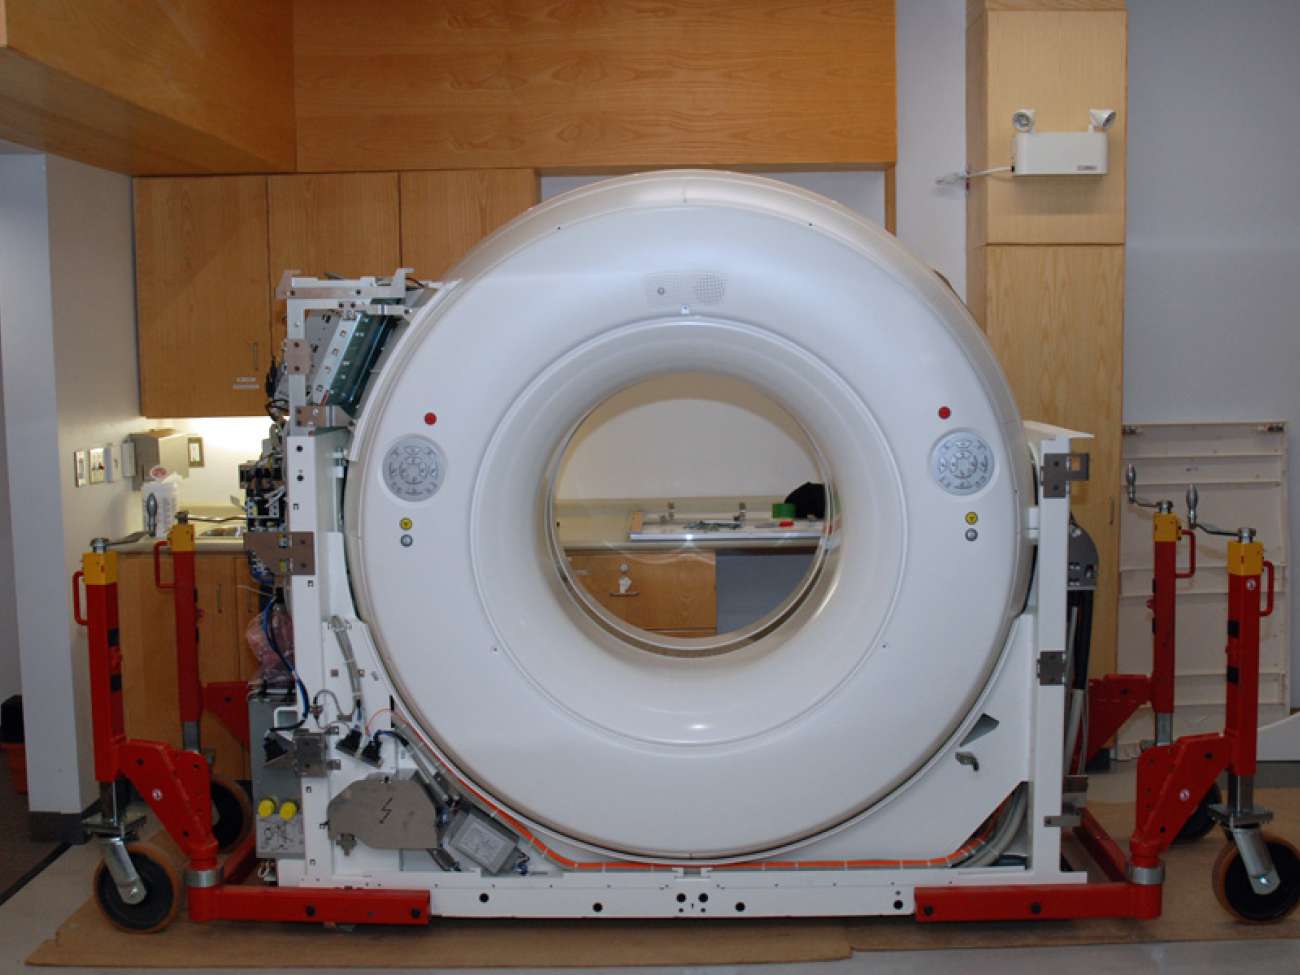 Part of the CT simulator in its new home.